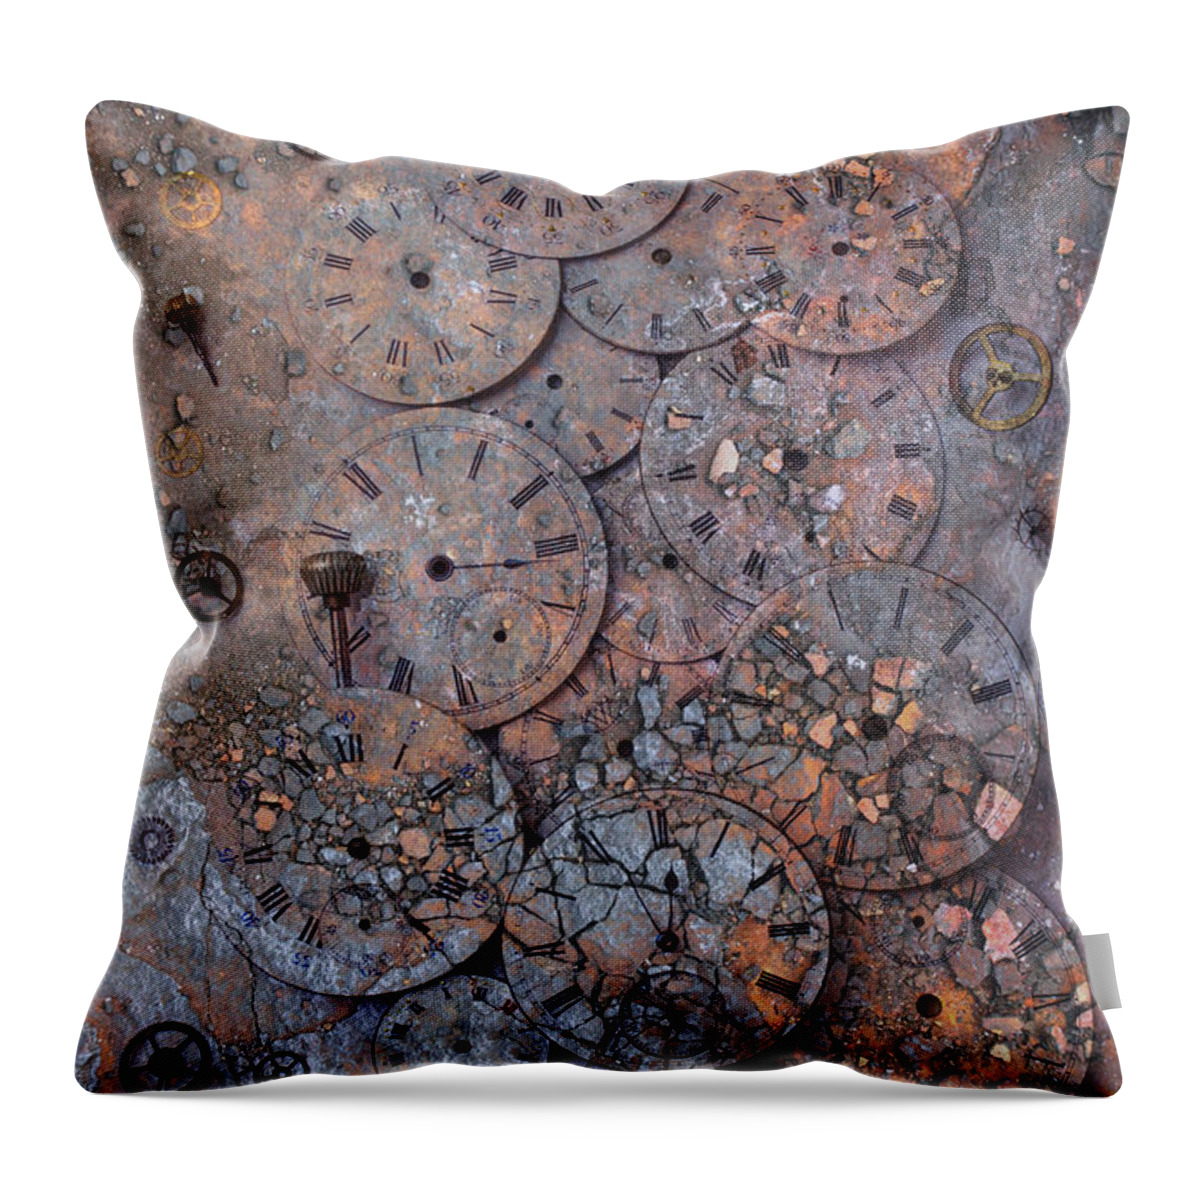 Time Throw Pillow featuring the photograph Watch Faces Decaying by Garry Gay